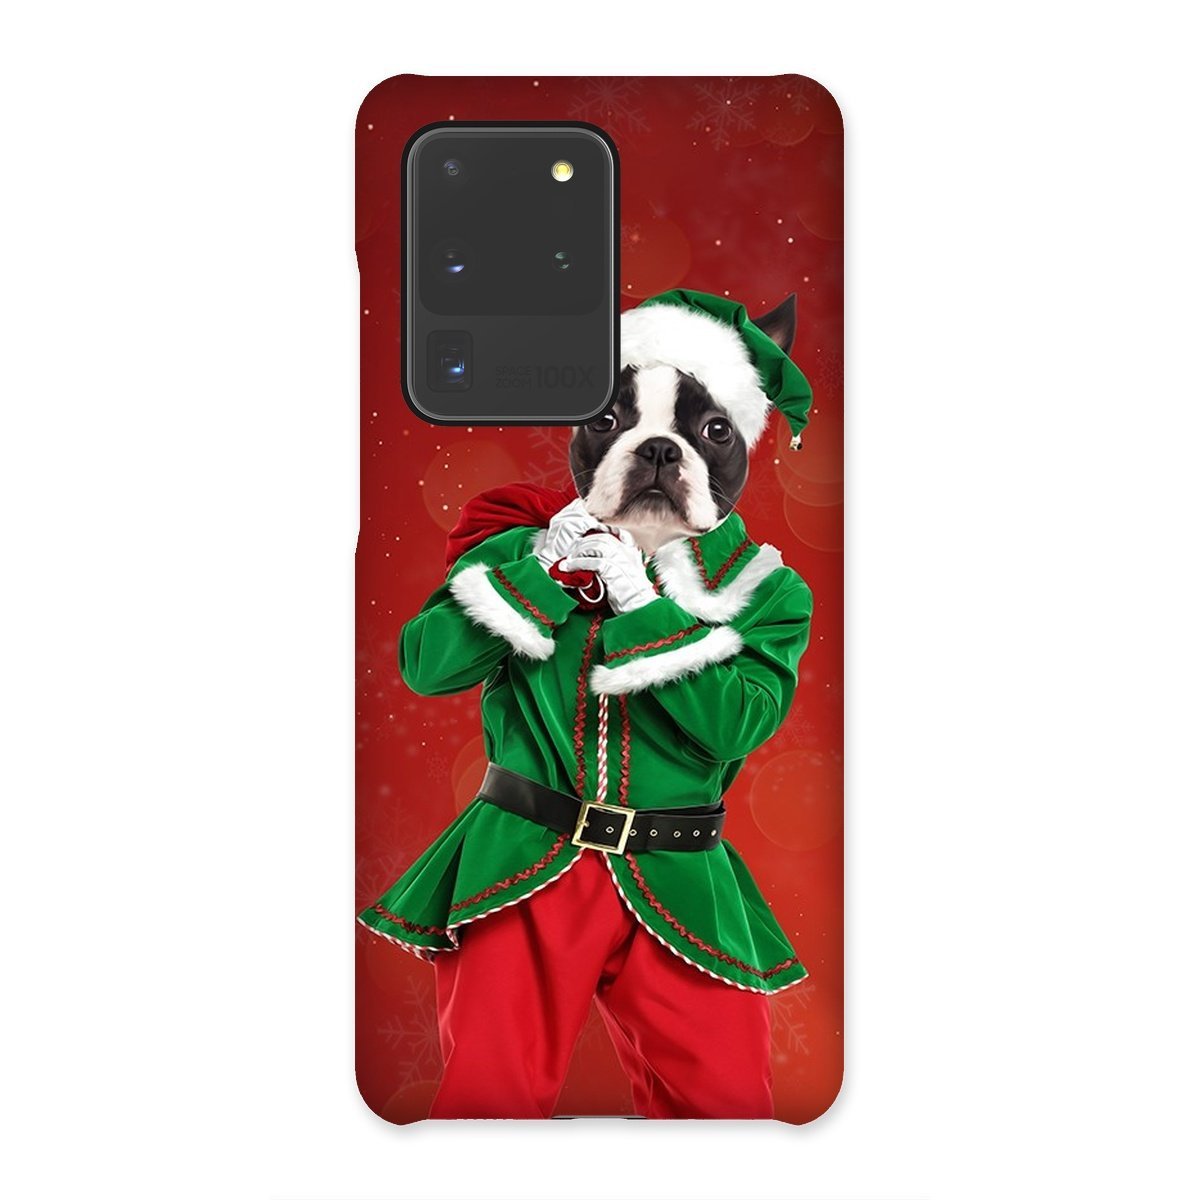 The Male Elf: Custom Pet Phone Case - Paw & Glory - paw and glory, personalised puppy phone case, dog and owner phone case, dog portrait phone case, personalised cat phone case, puppy phone case, phone case dog, Pet Portraits phone case,